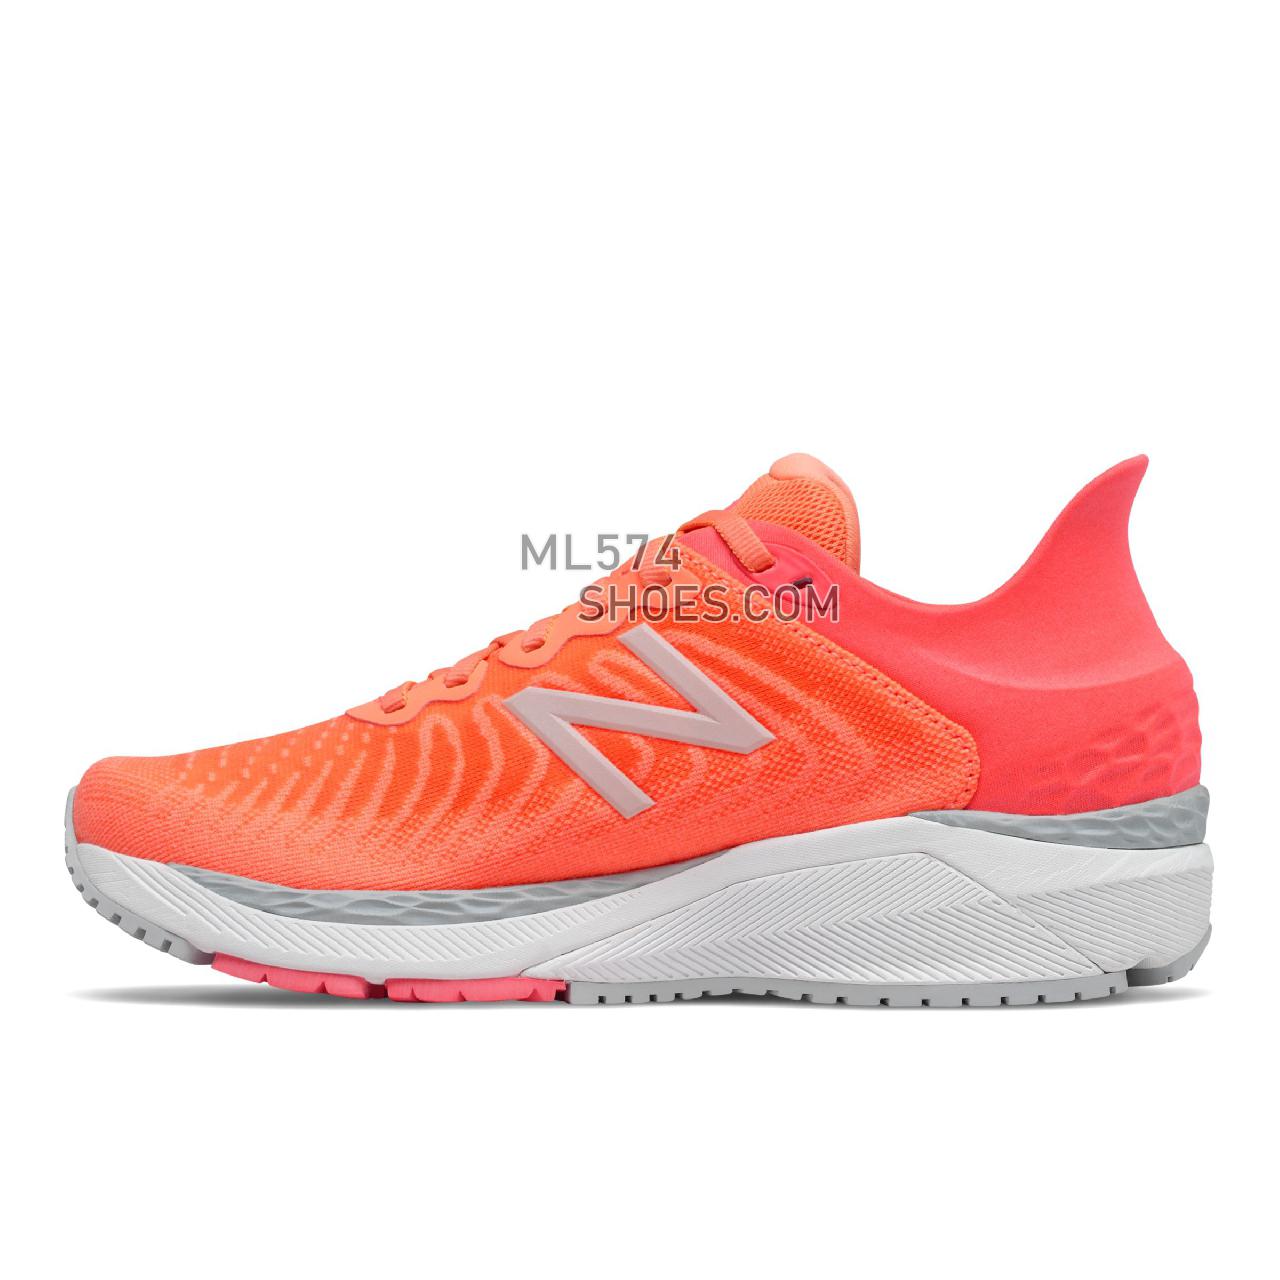 New Balance Fresh Foam 860v11 - Women's Stability Running - Citrus Punch with Vivid Coral - W860P11